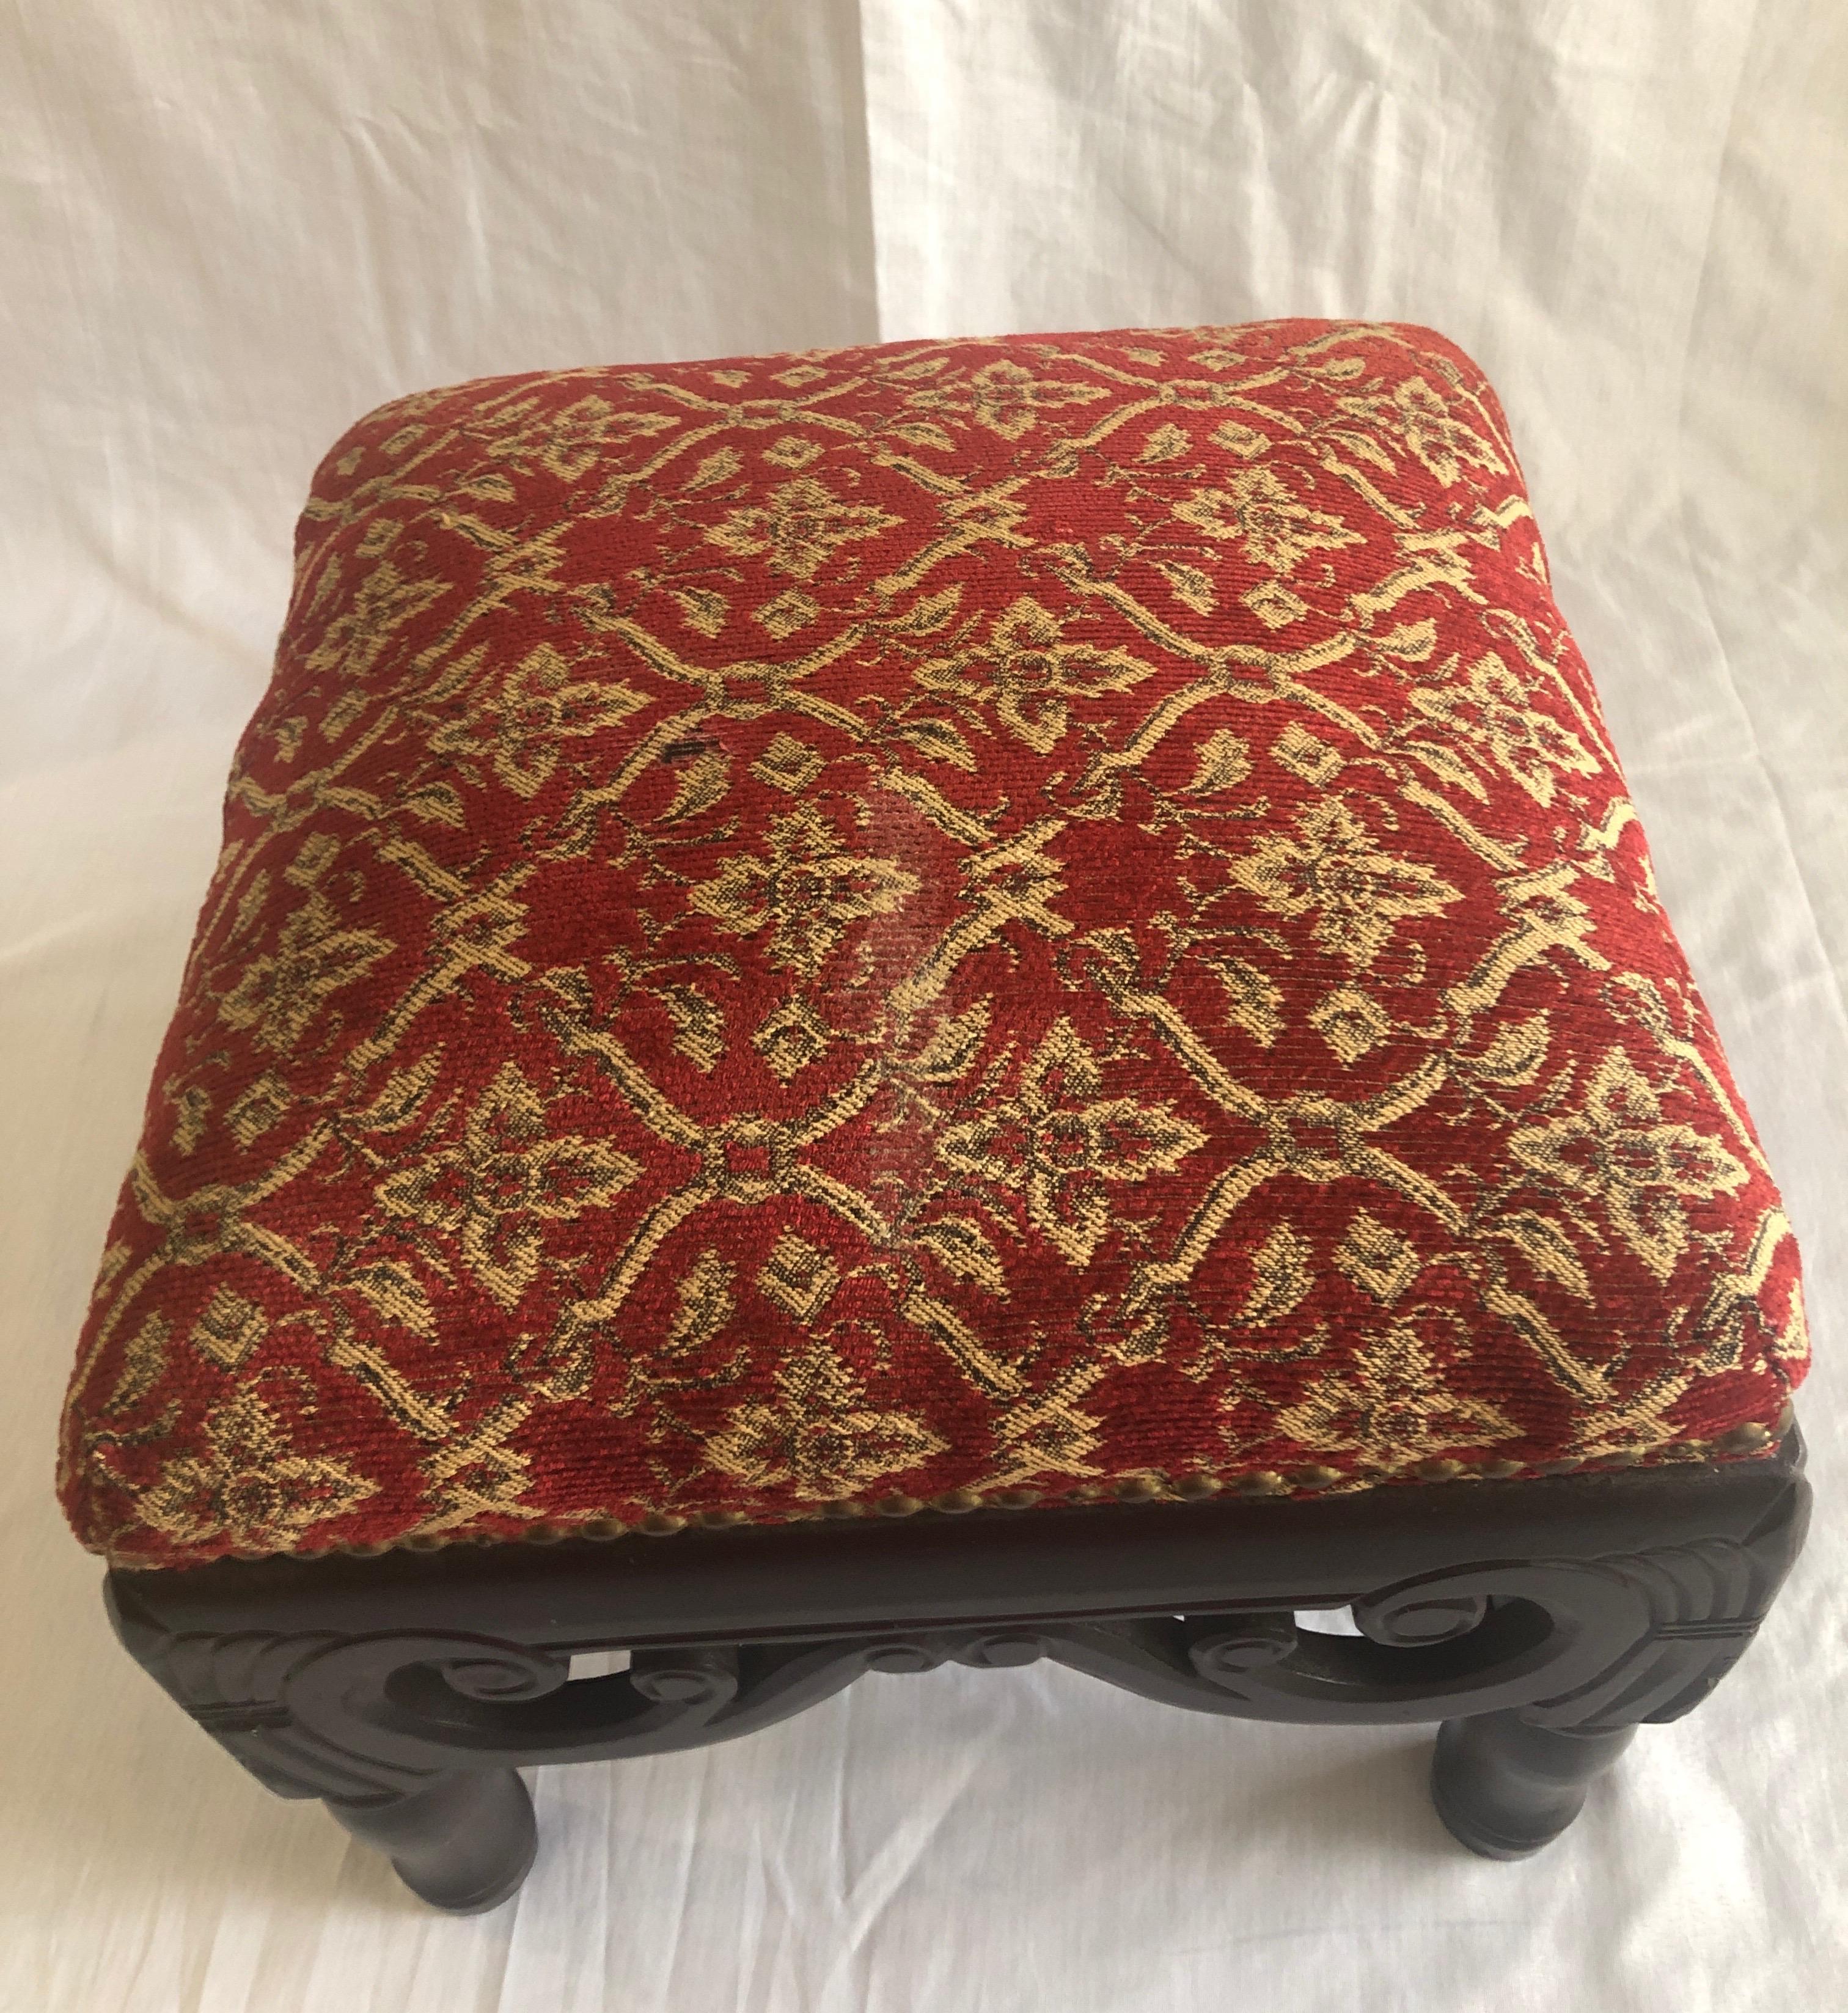 Vintage red and gold square upholstered footstool,
Dark color stained hand carved wood stool.
Gold and red chanille fabric and brass nail heads.
Size: 12.5” W x 12.5” D x 11.5” H.